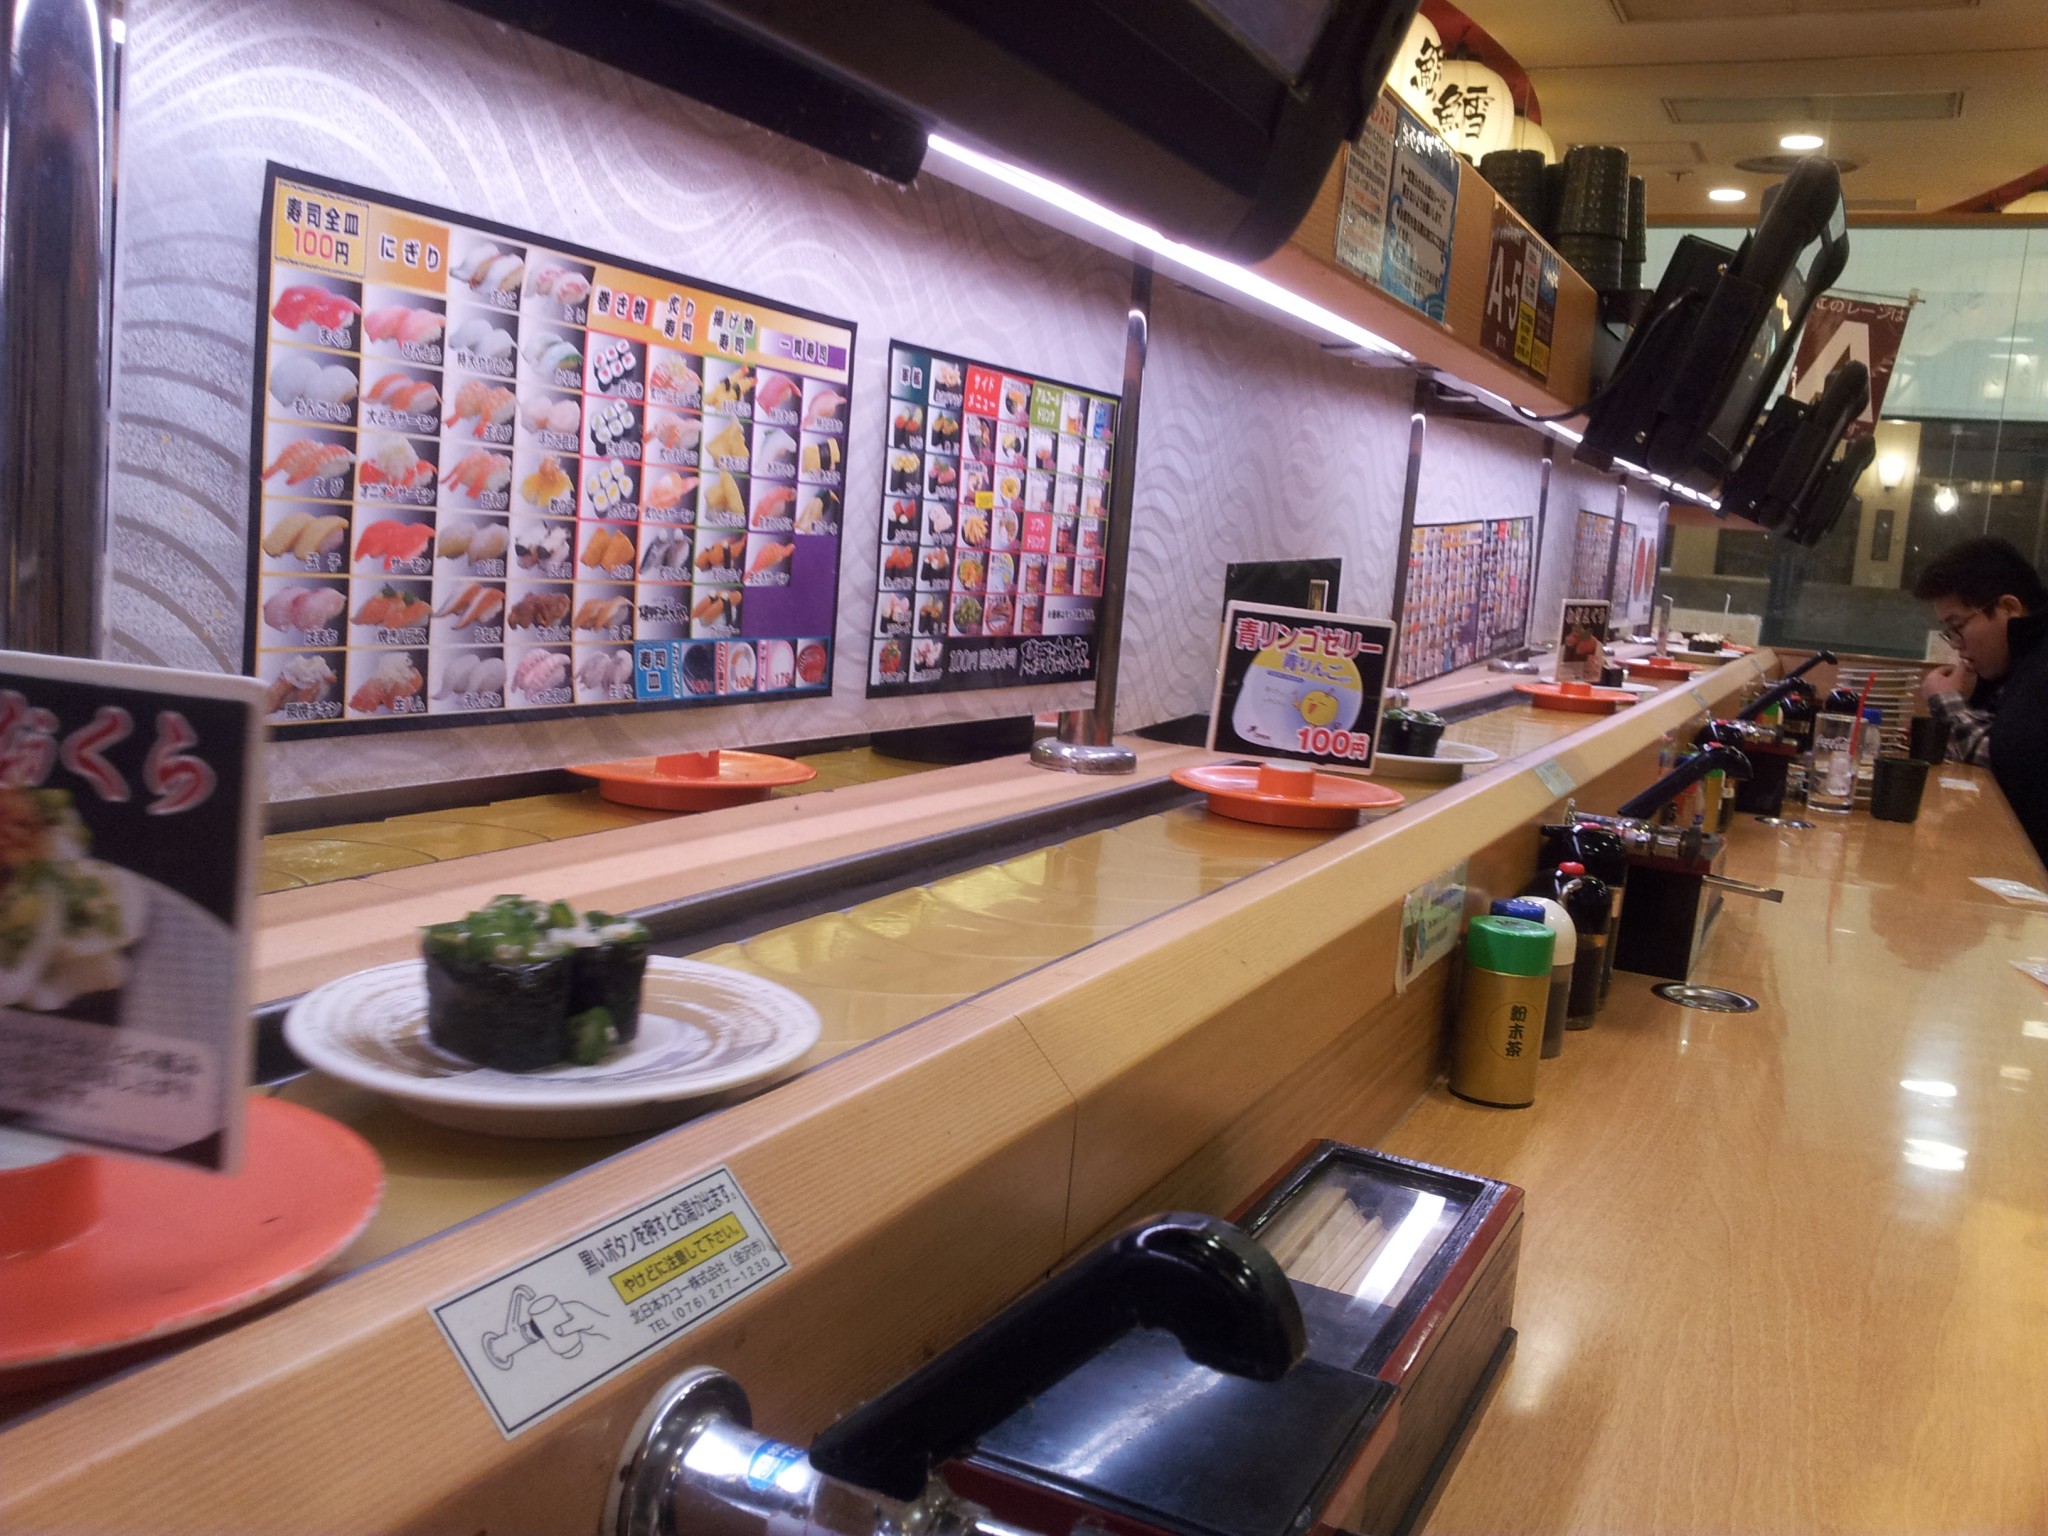 Sushi train: Cheap and Delicious Japanese Restaurants!